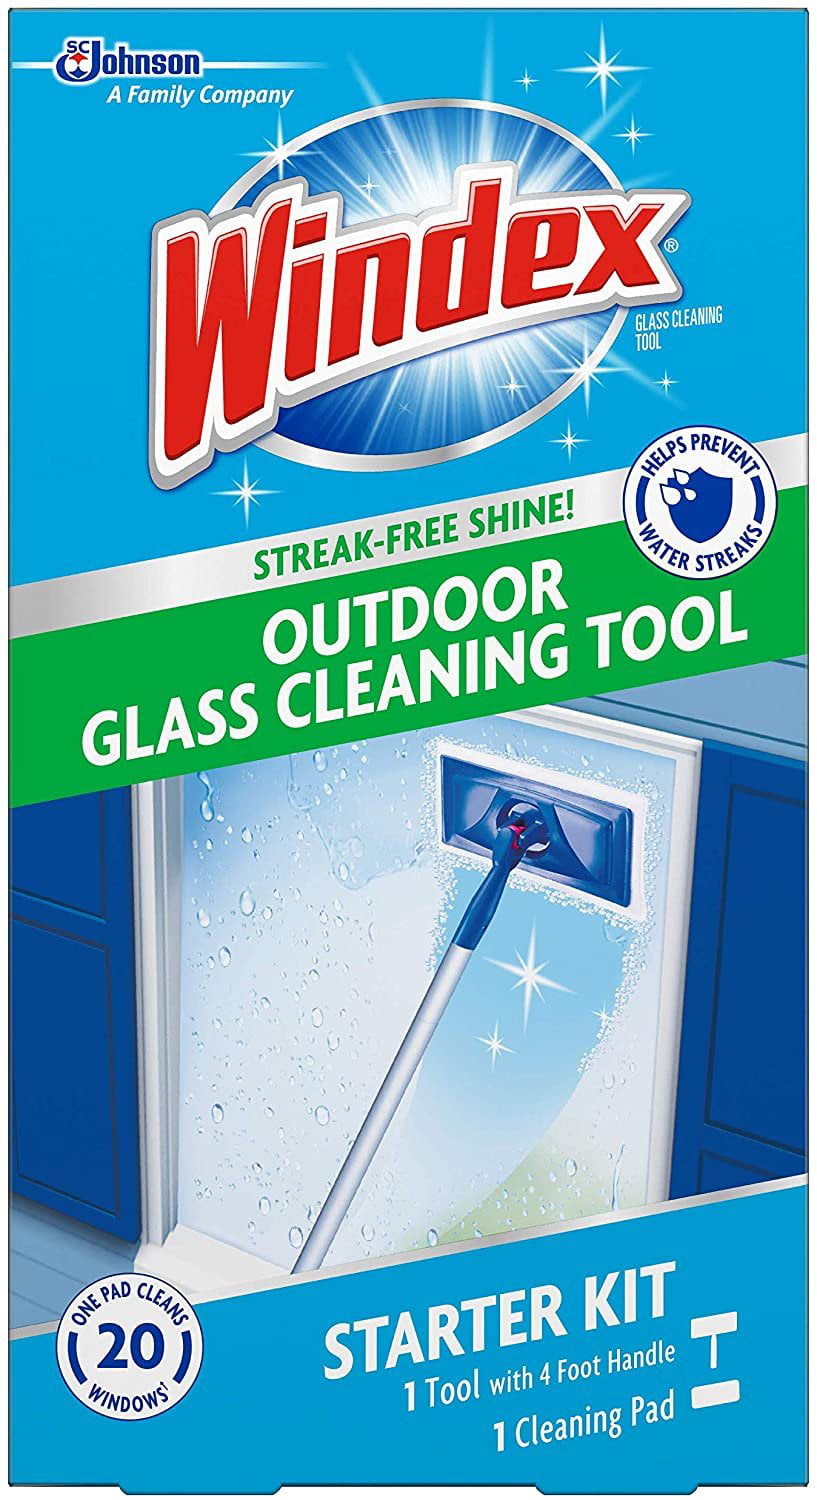 Shop Generic Wonderlife Portable Home Cleaning Window Sill Window